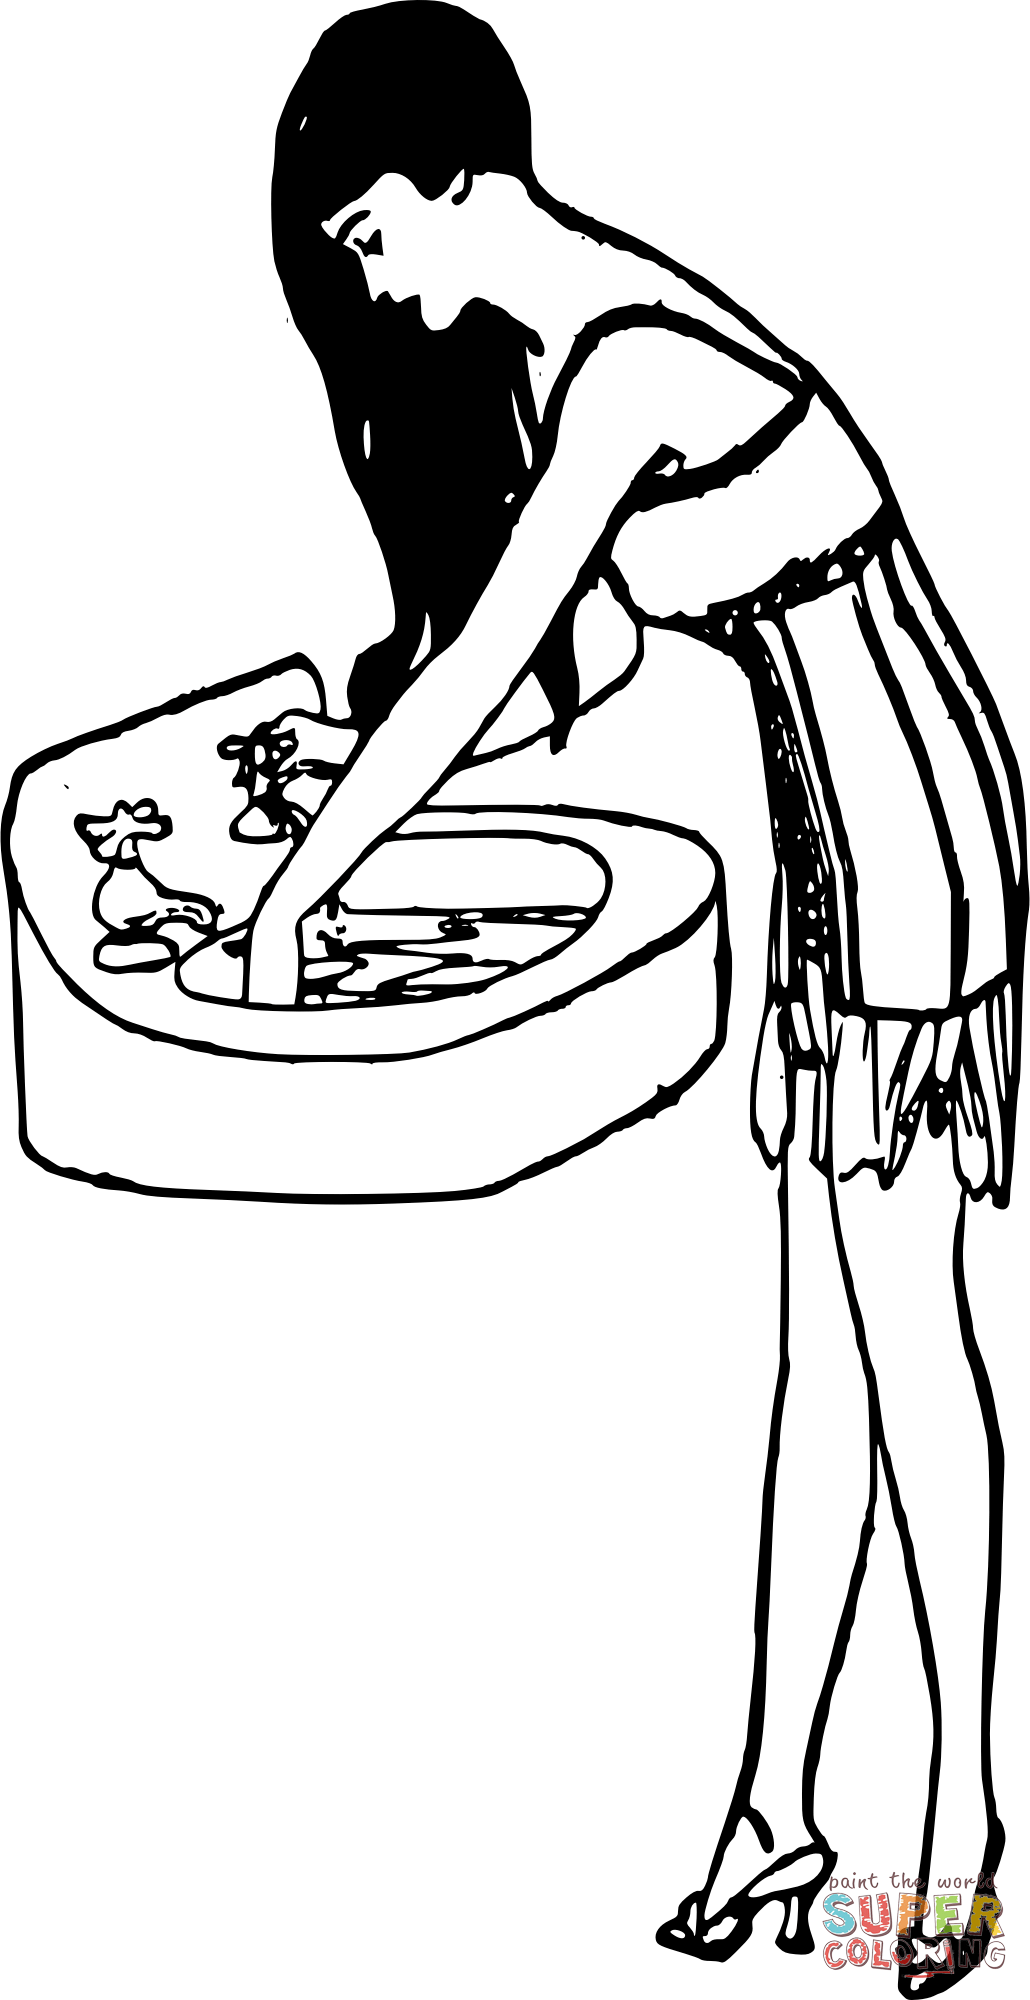 Vintage Lady and Sink coloring page | Free Printable Coloring Pages